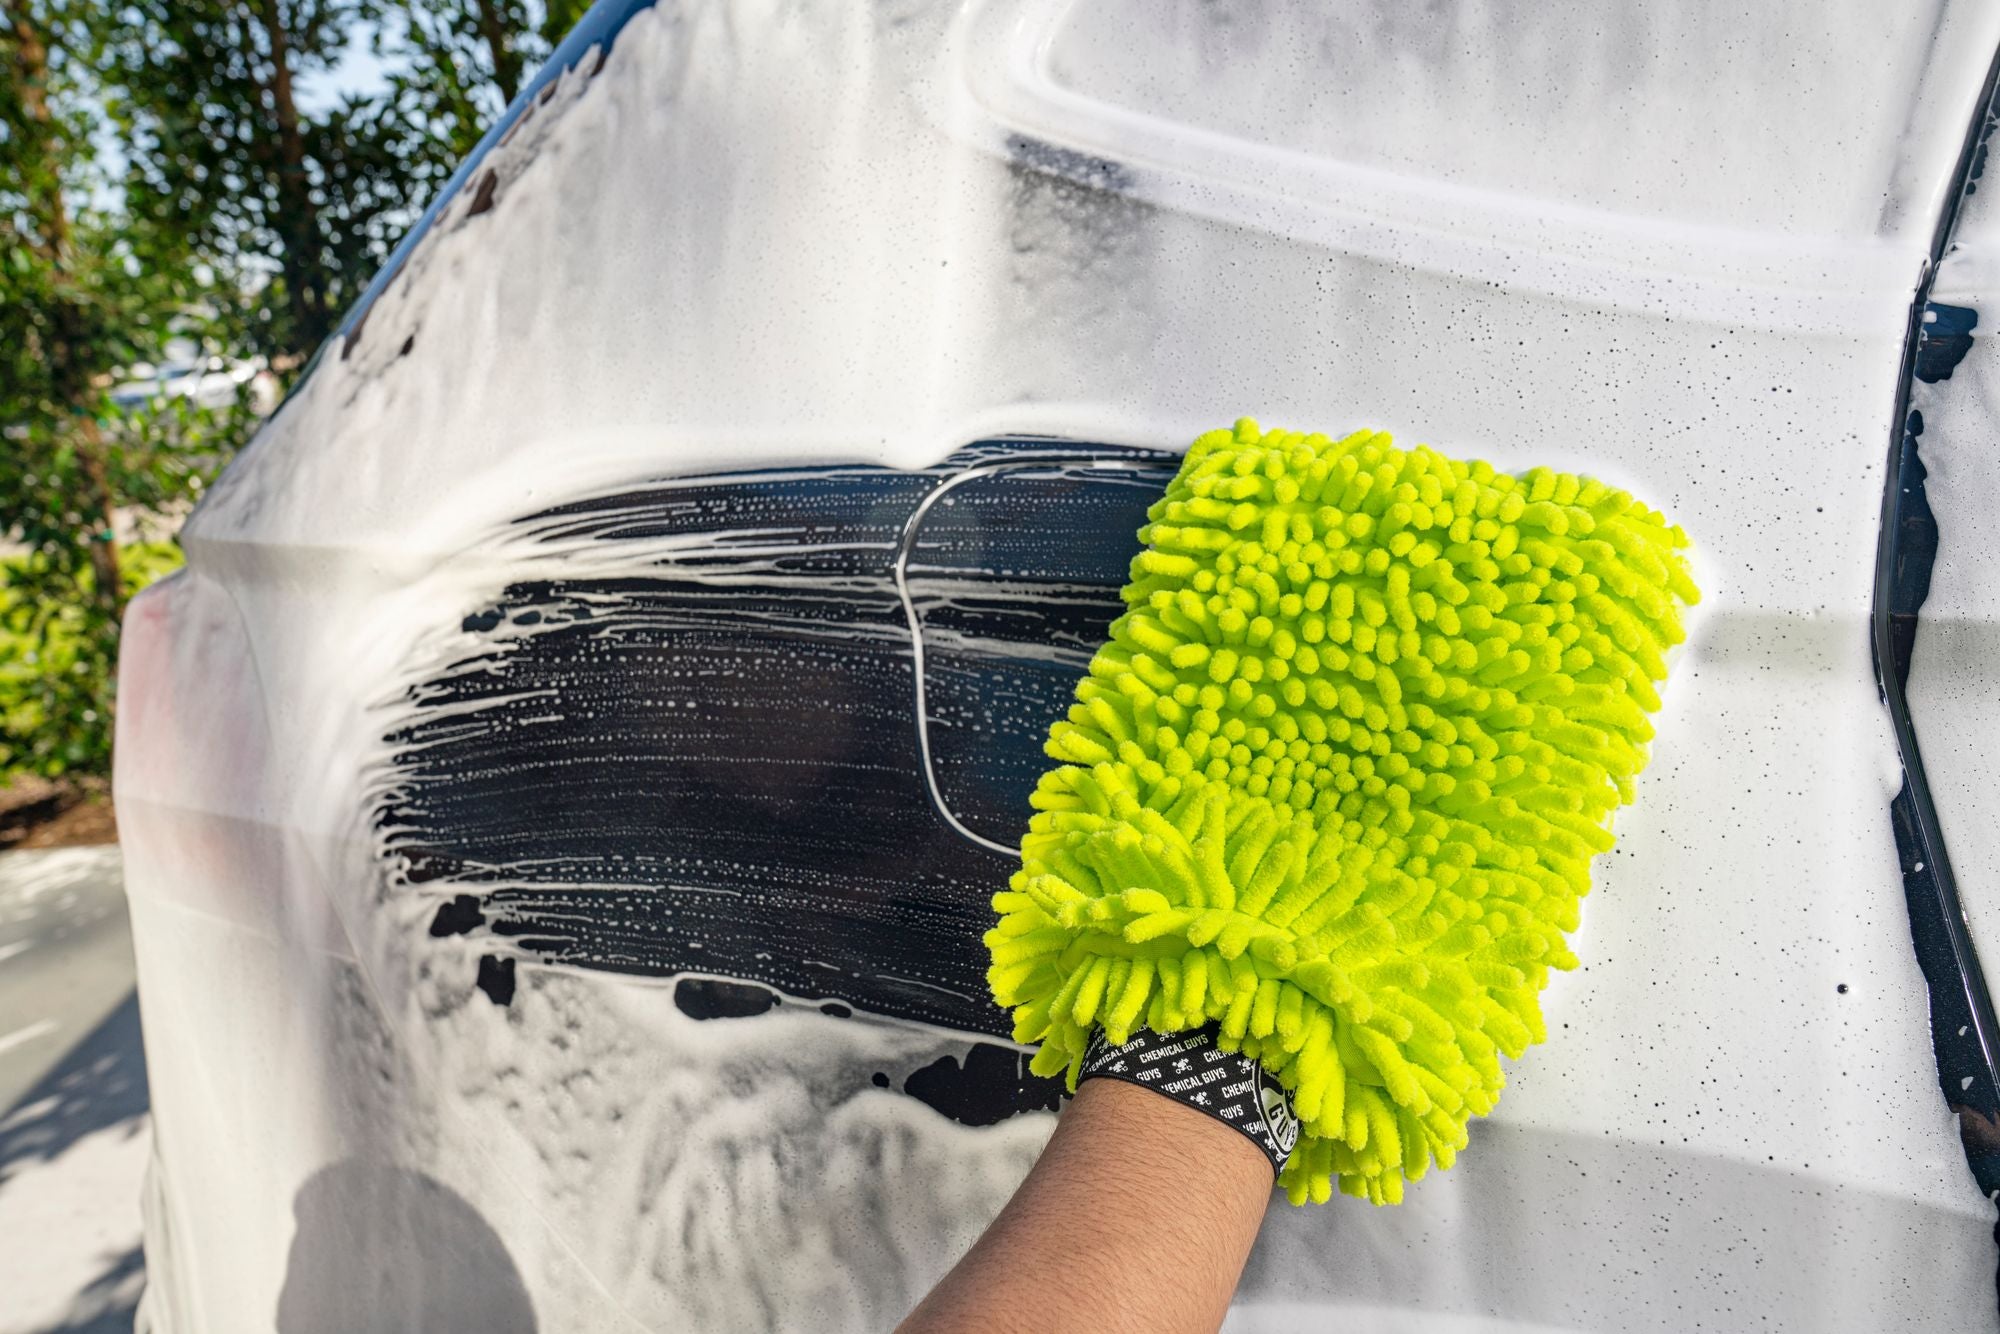 Wiping the suds off the back of a vehicle with the Chenille Wash Mitt